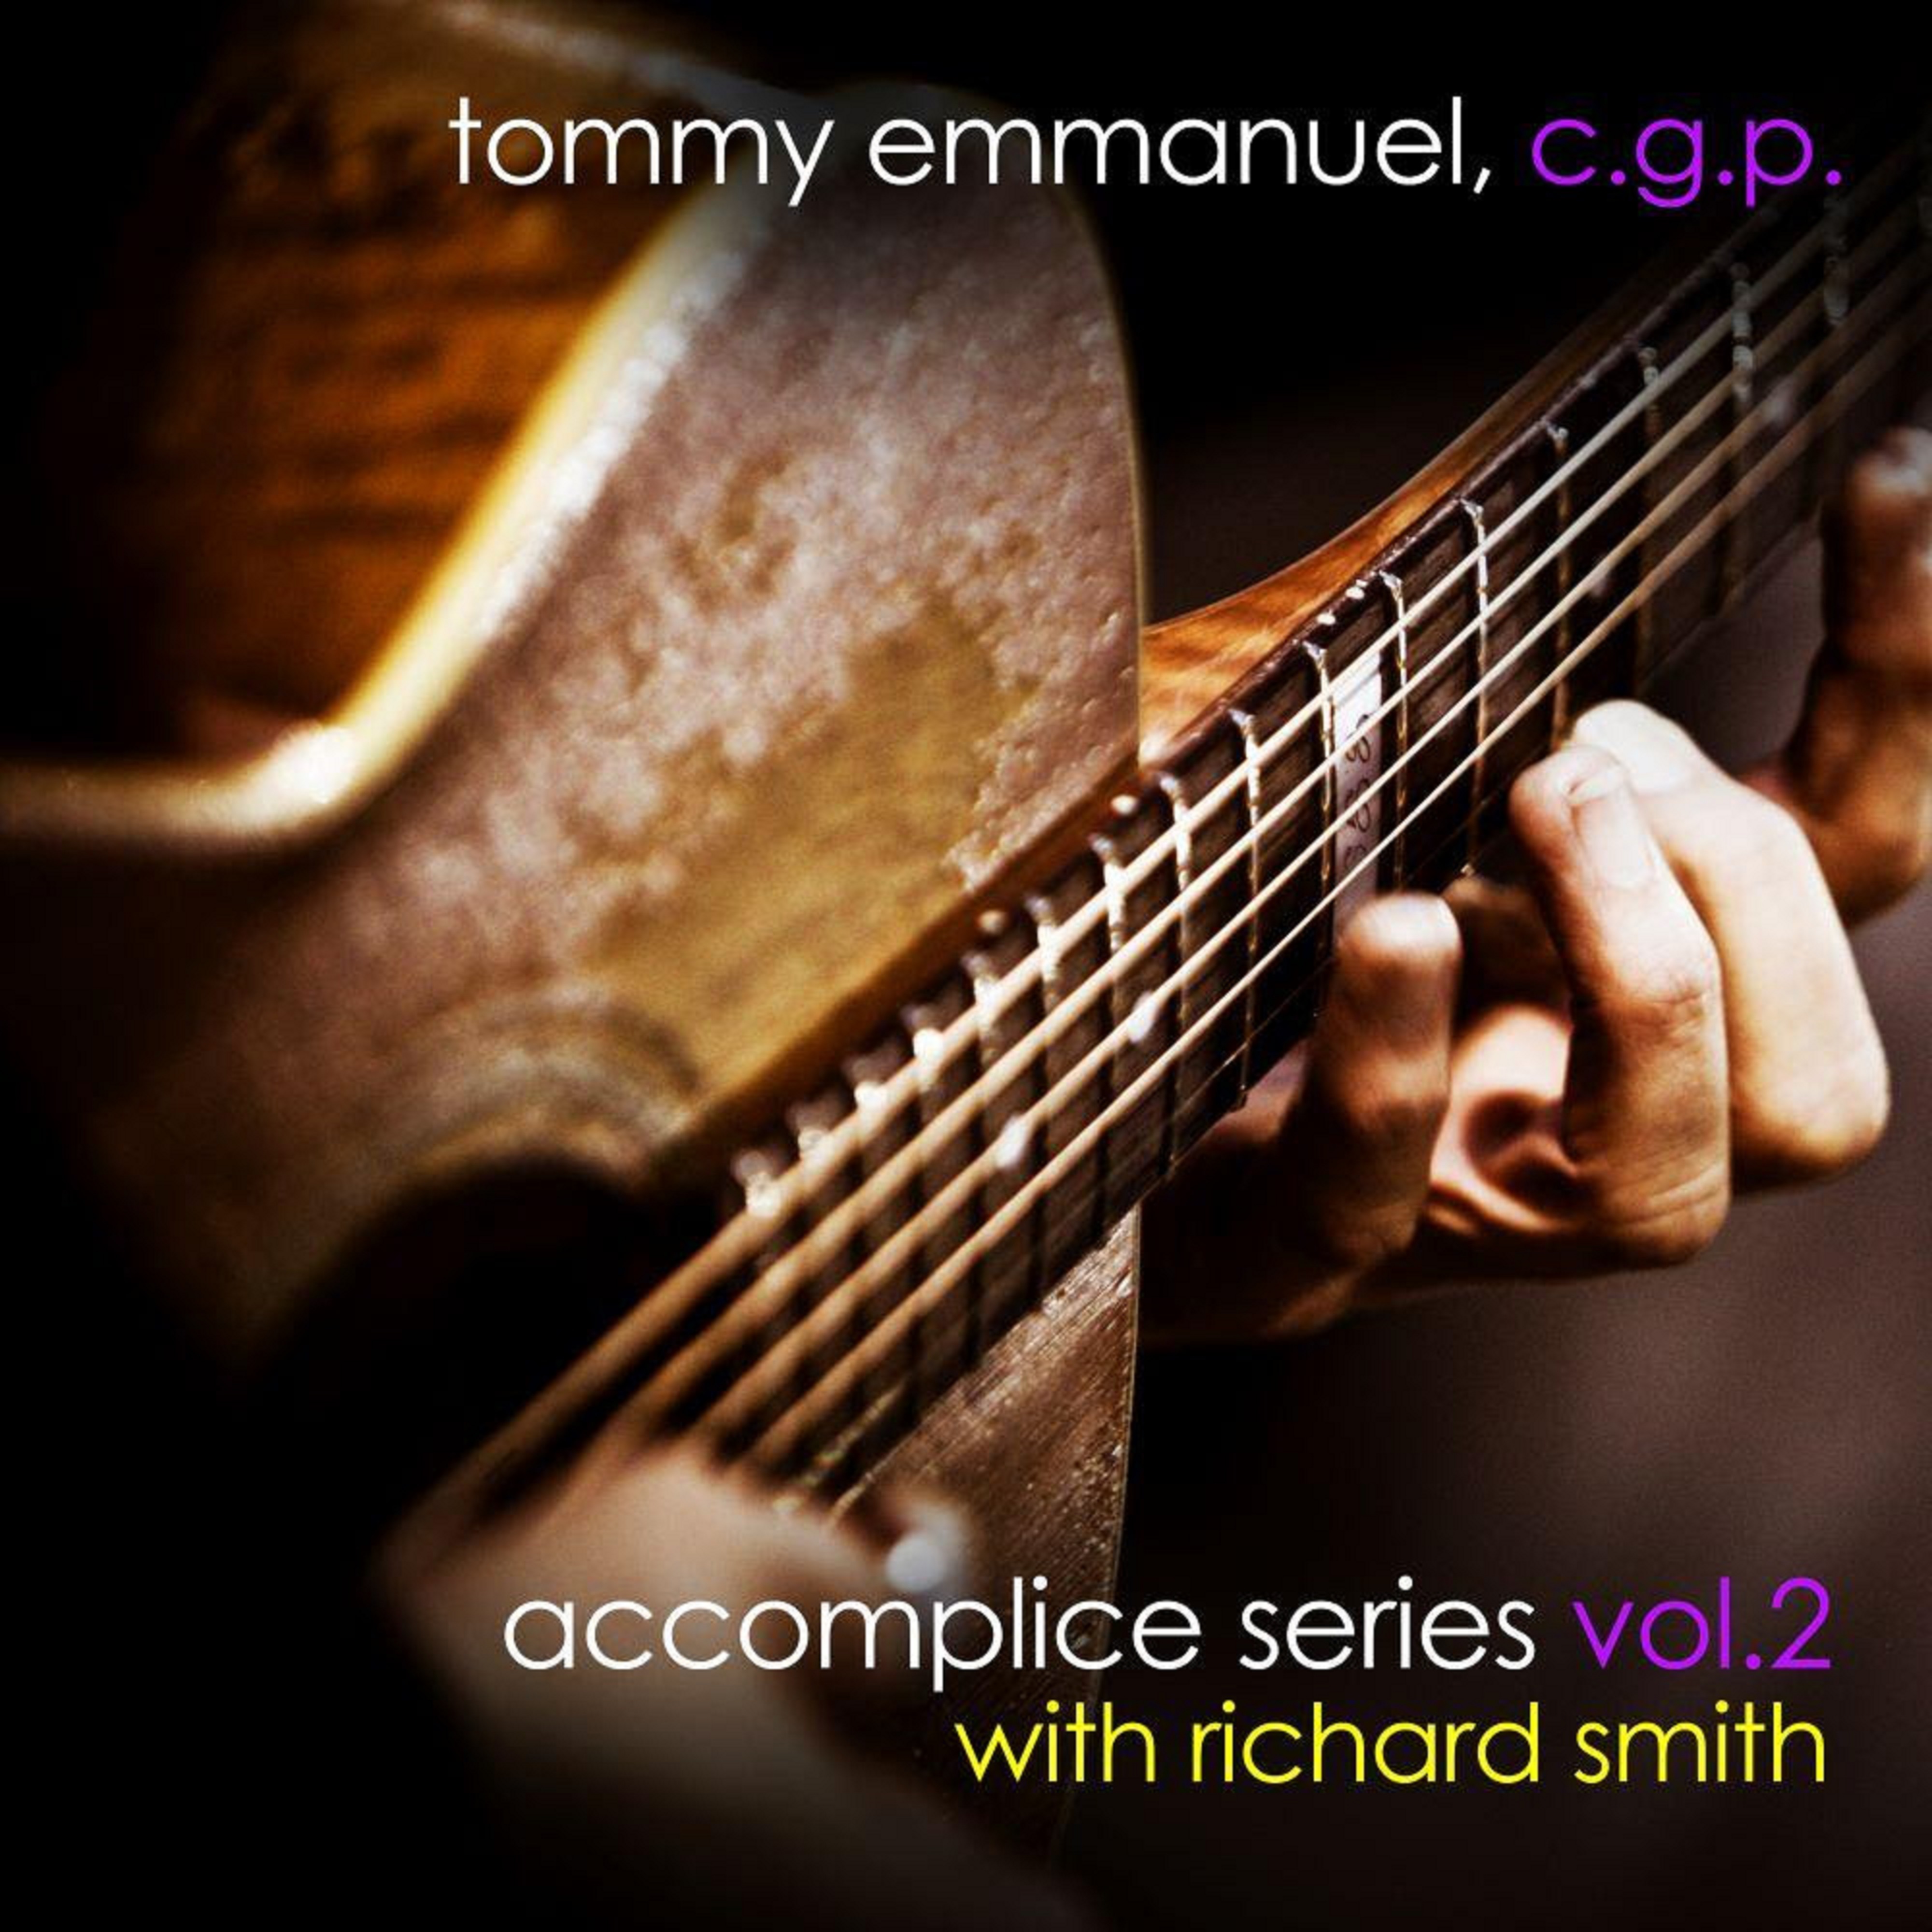 TOMMY EMMANUEL Announces New EP ‘Accomplice Series Vol. 2’ With Richard Smith Out 9/10